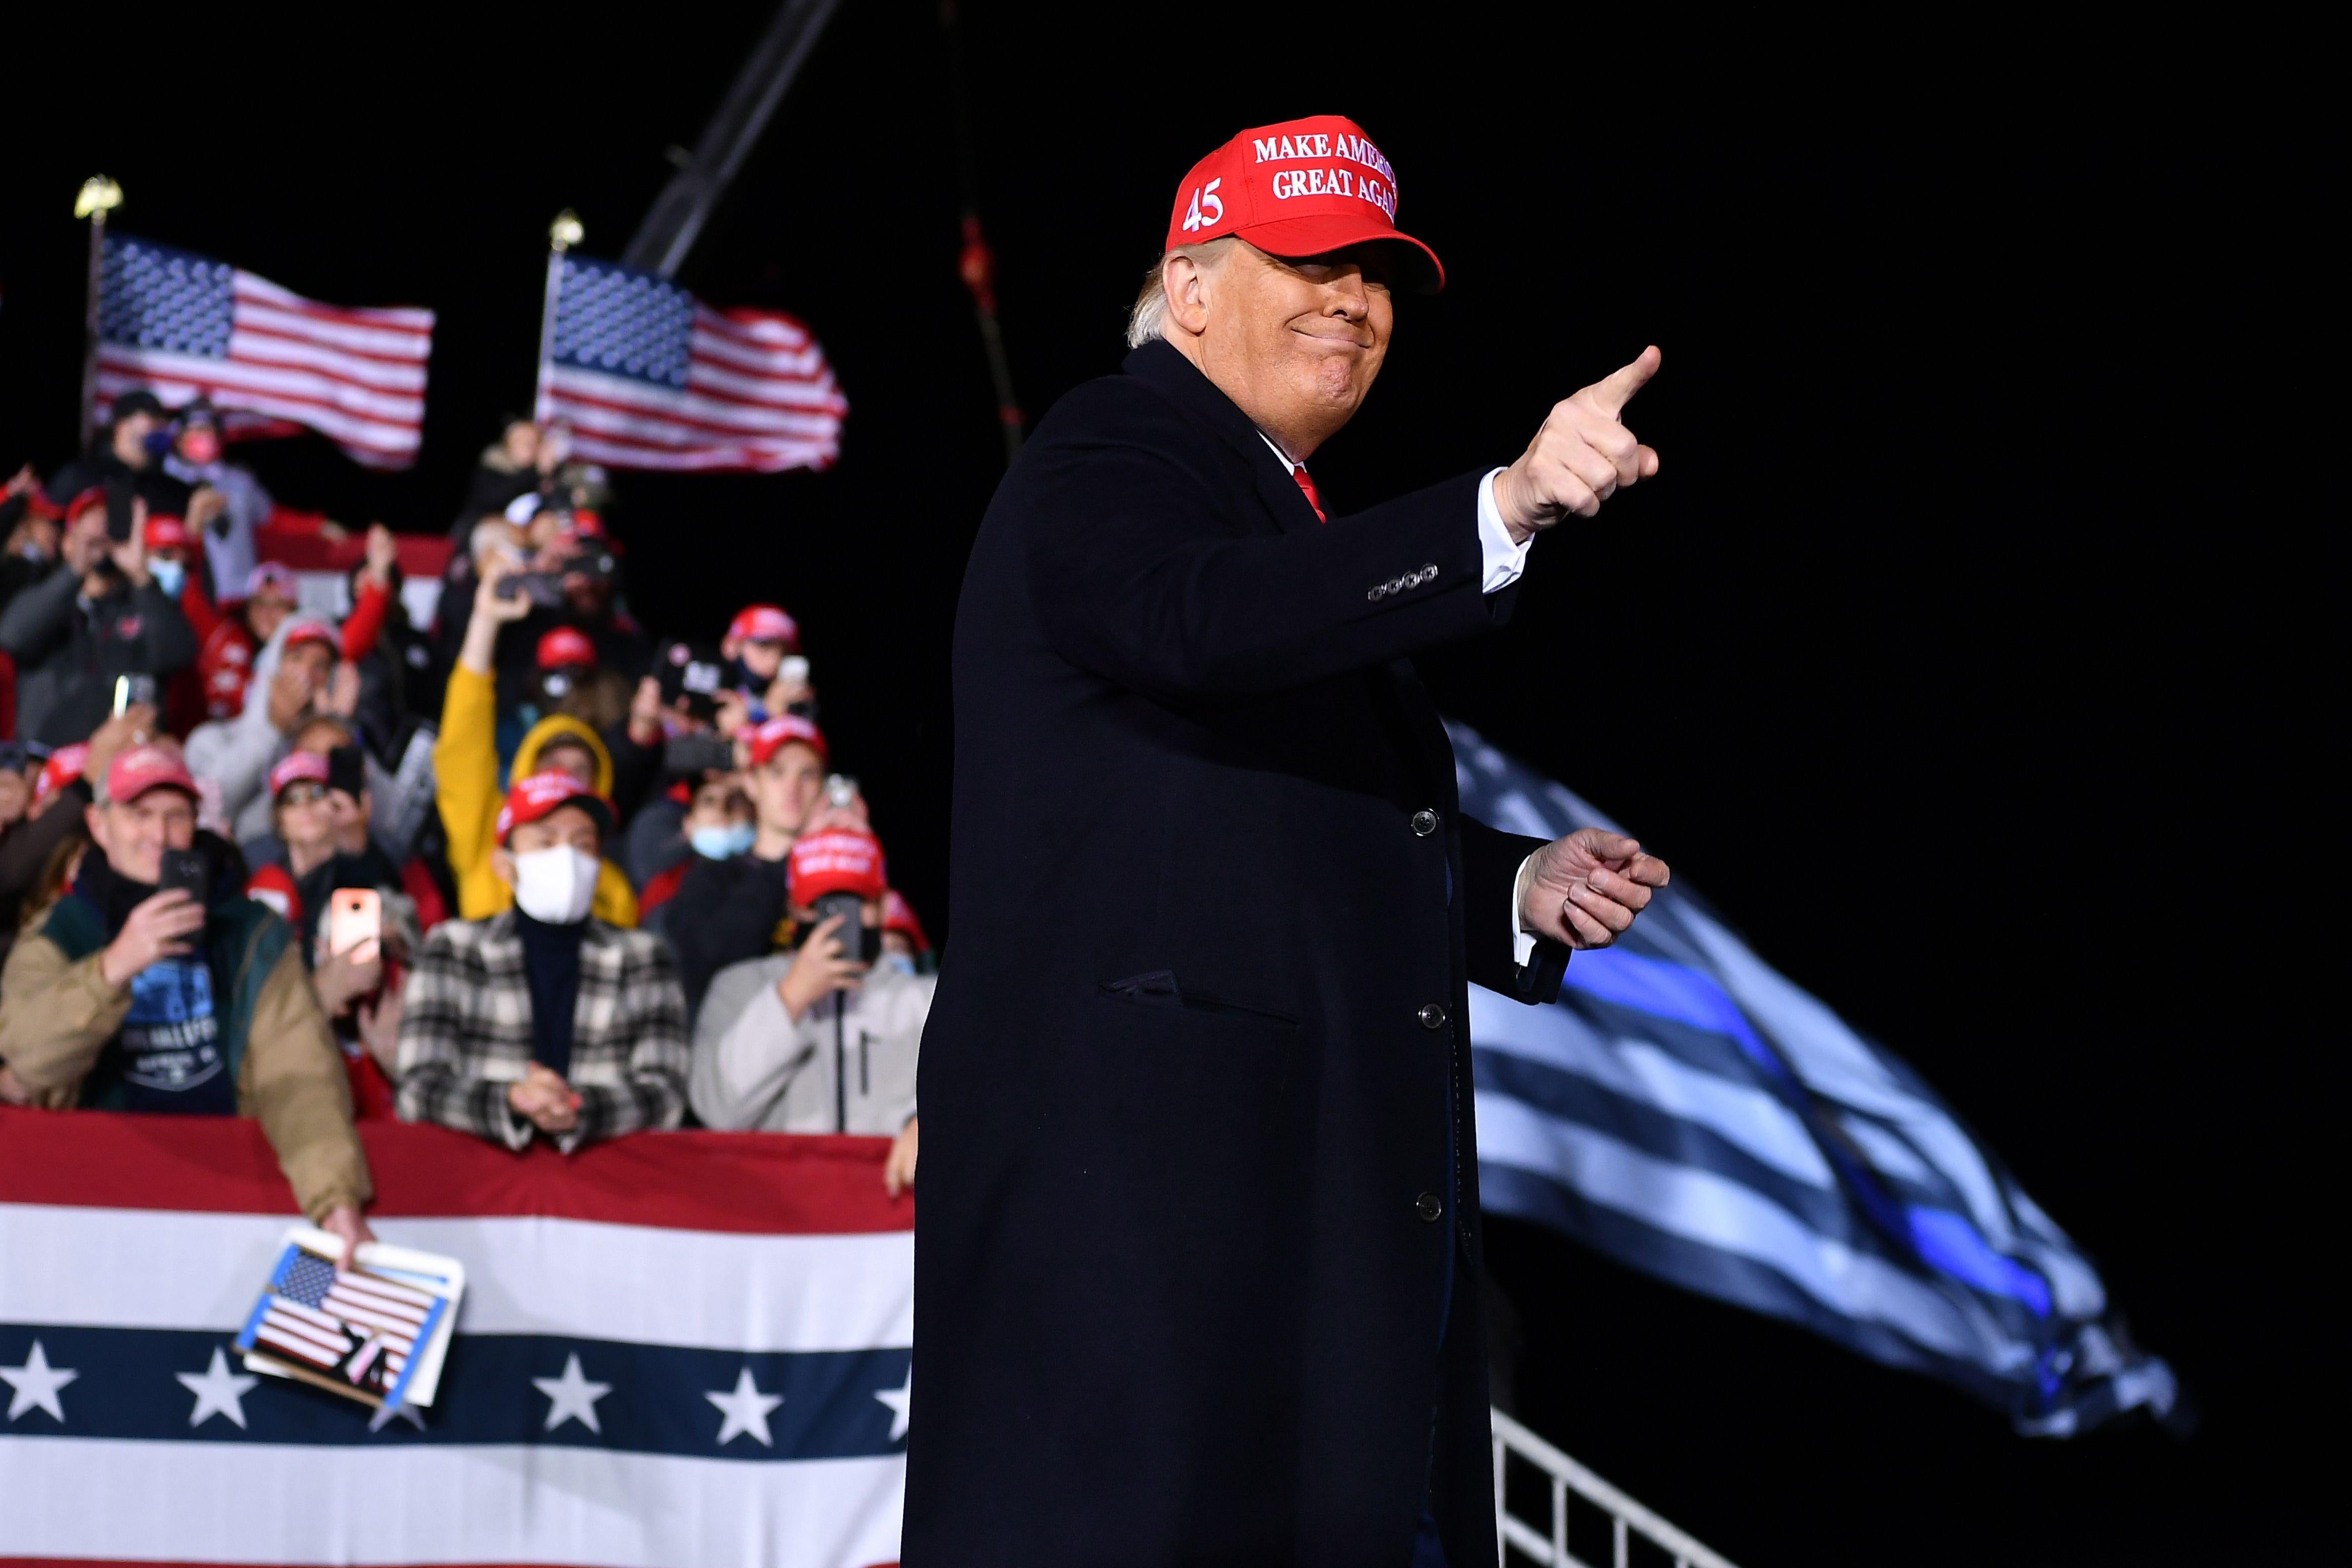 Trump, wearing a MAGA hat, points and smiles before a crowd of his supporters